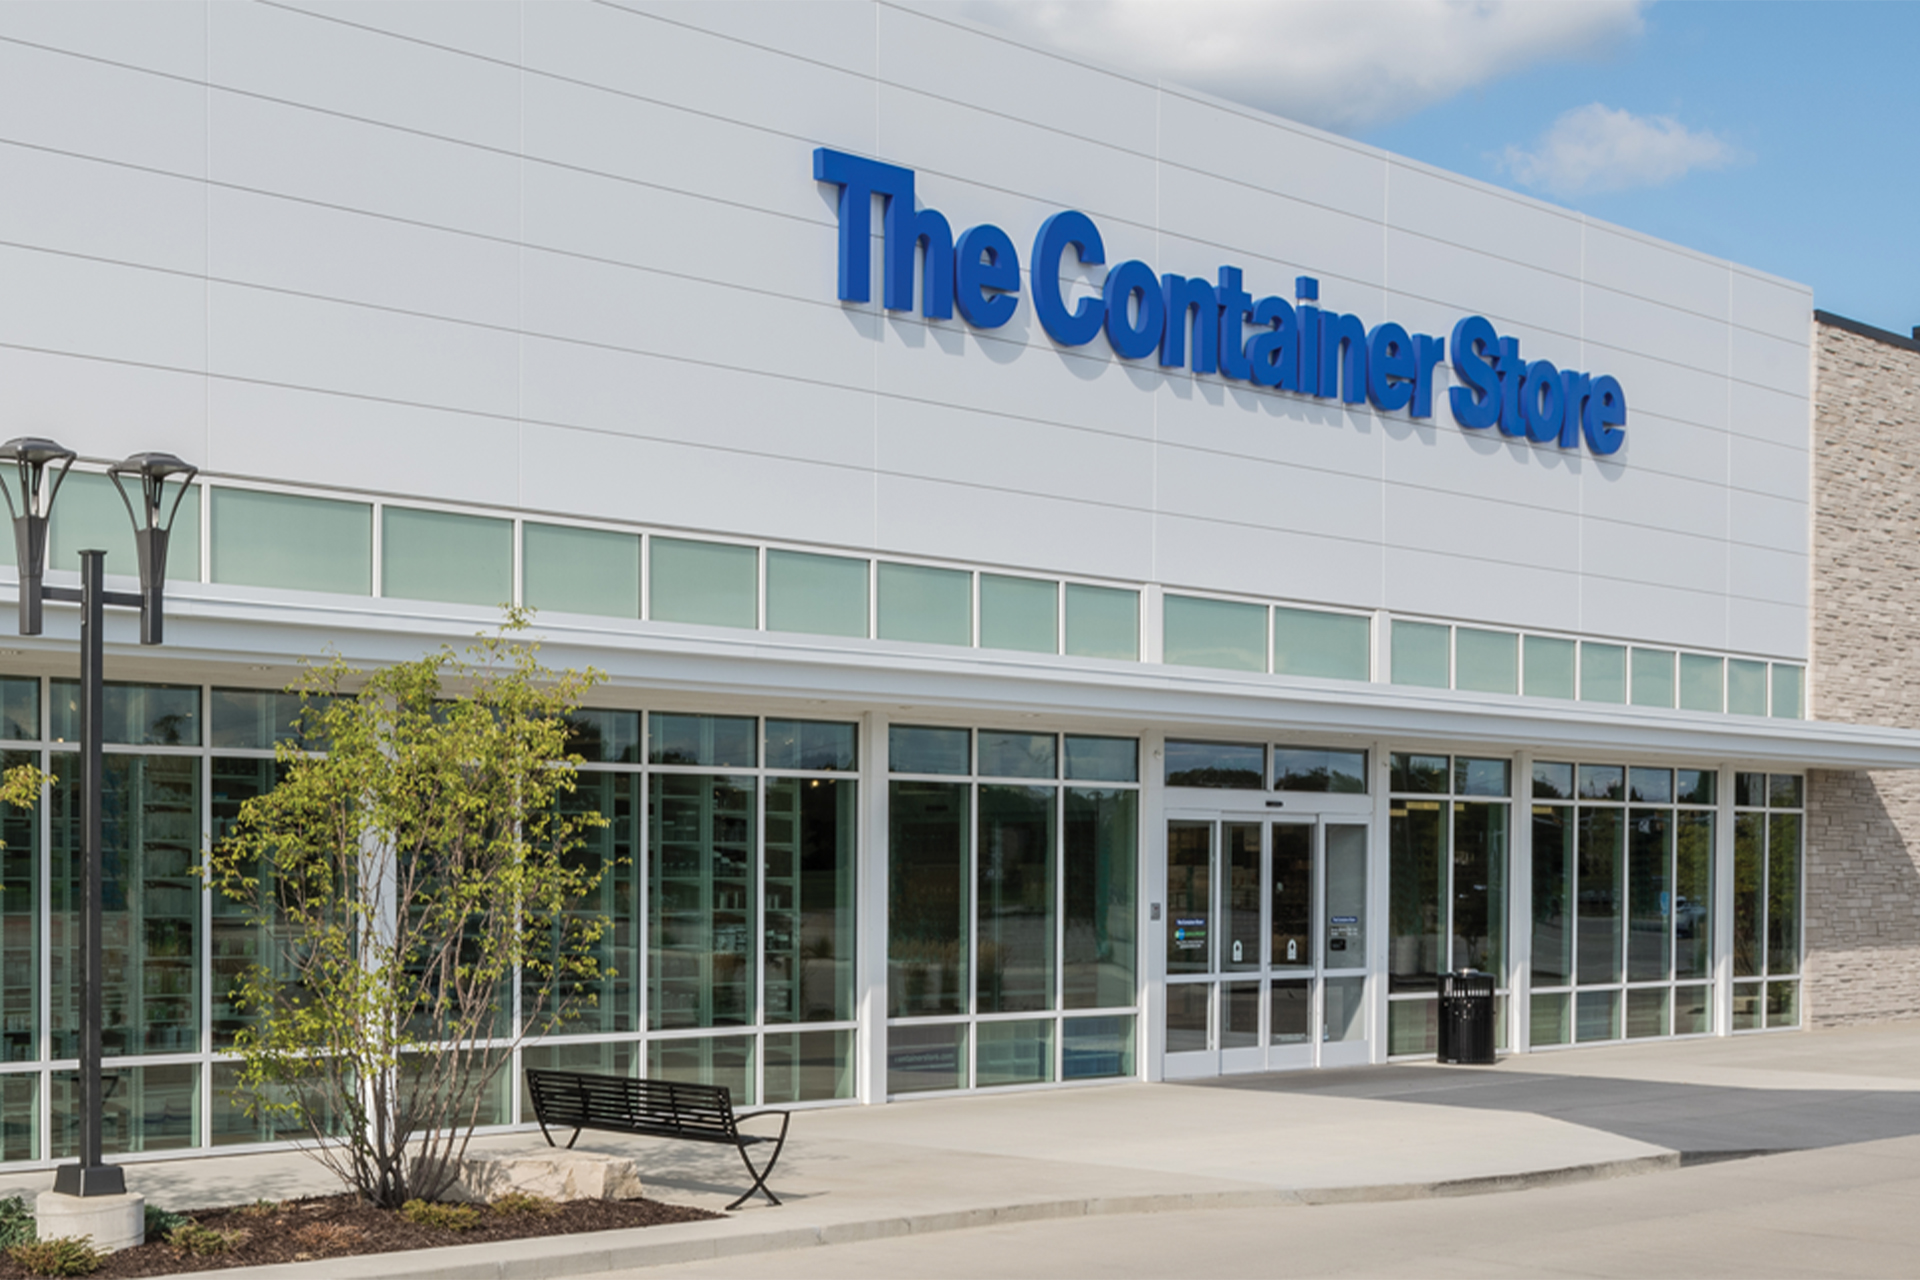 The Container Store Opens November 18th in Princeton, NJ